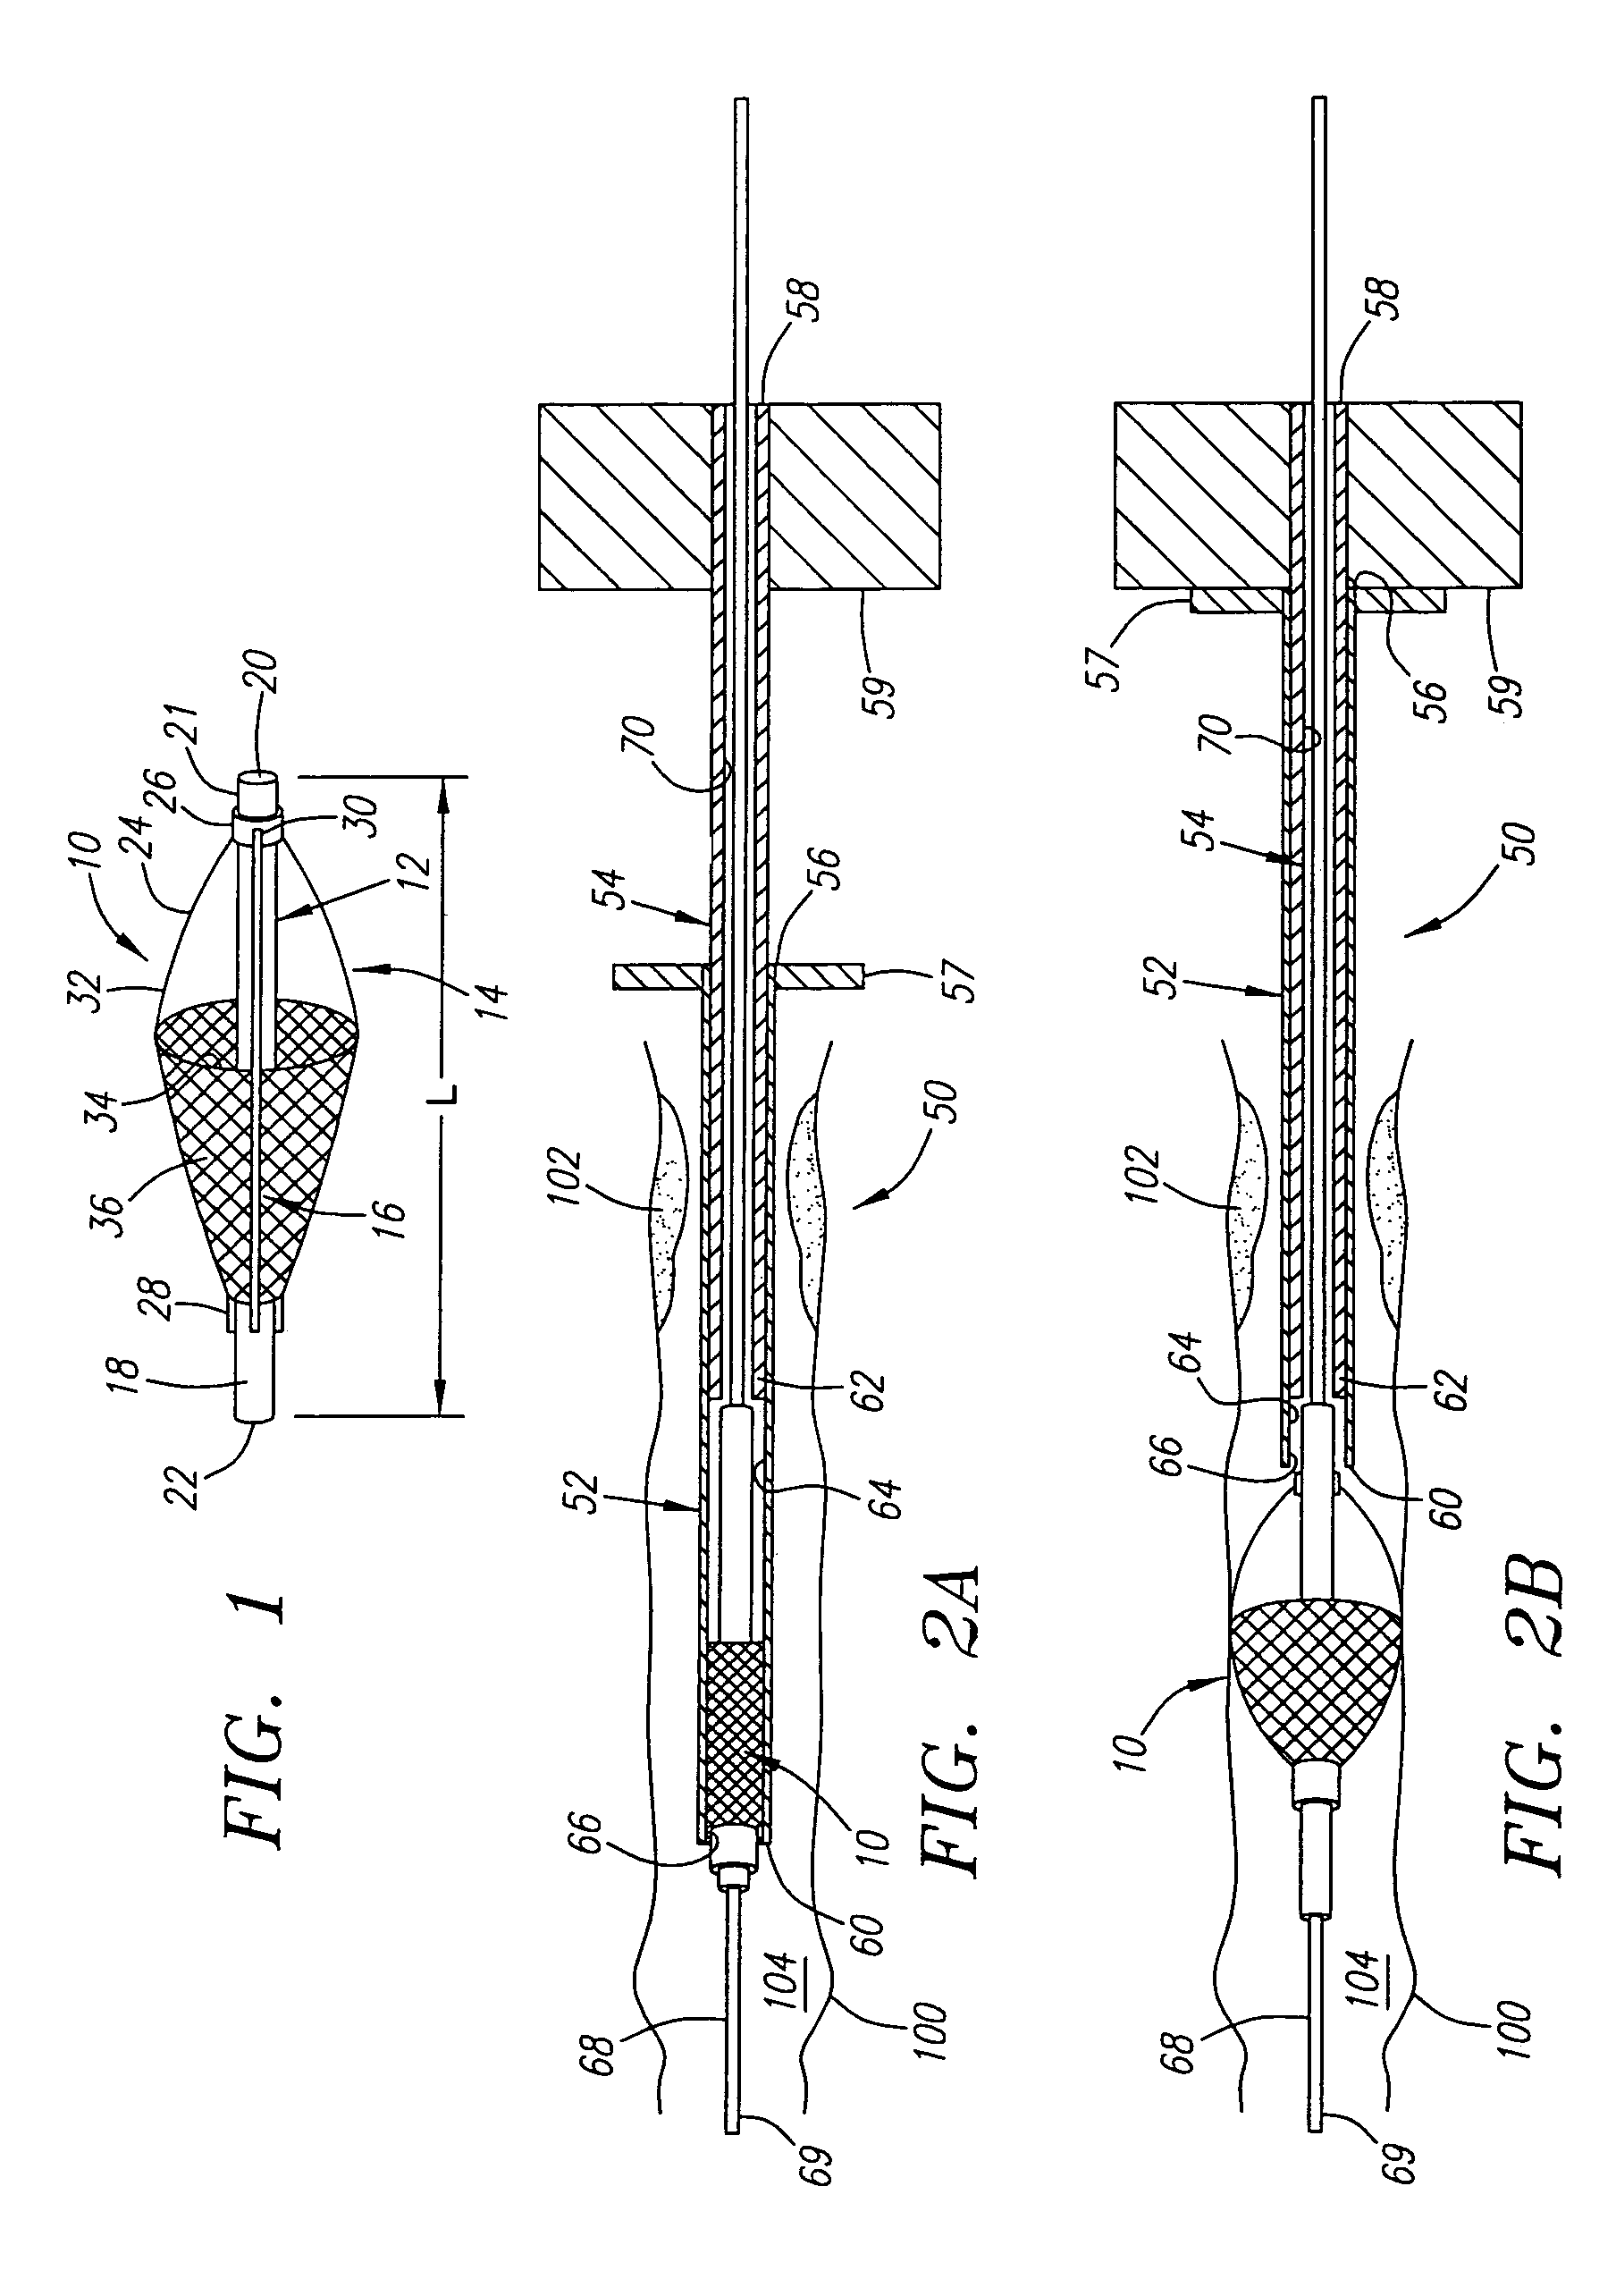 Deployable recoverable vascular filter and methods for use